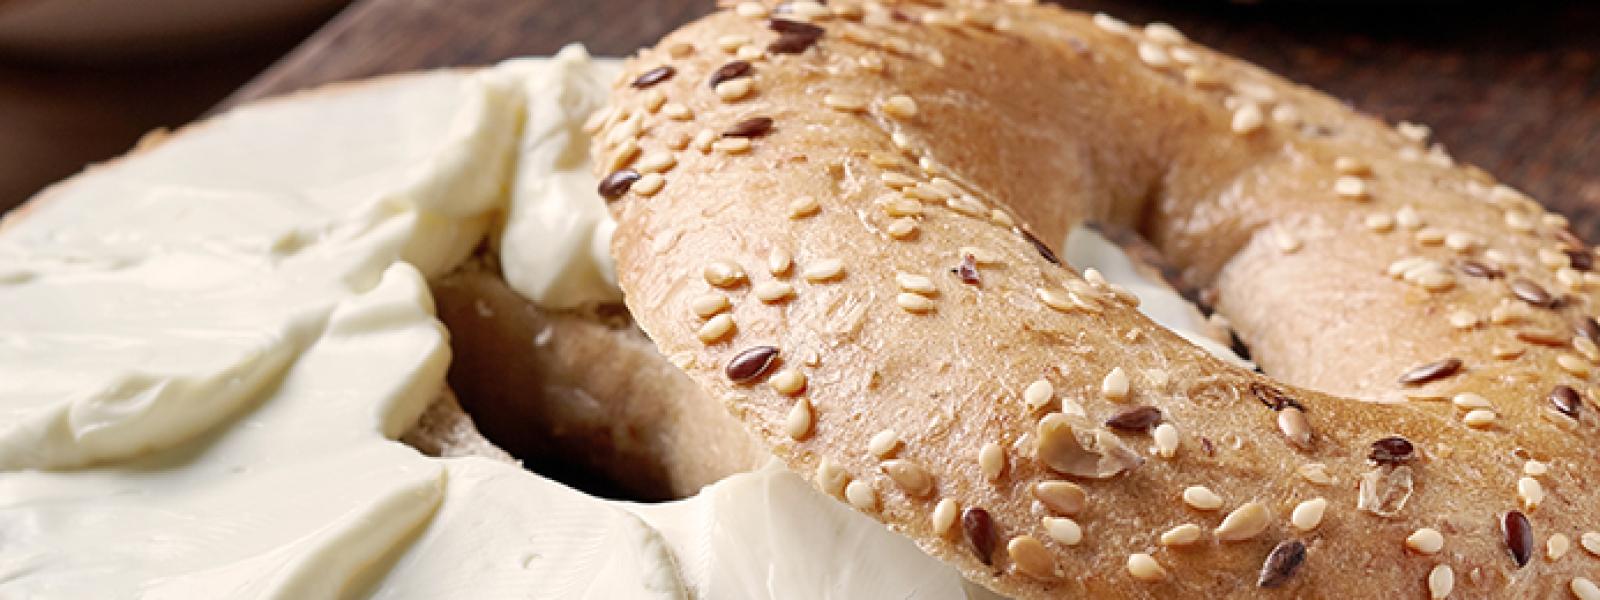 cream cheese with bagel banner